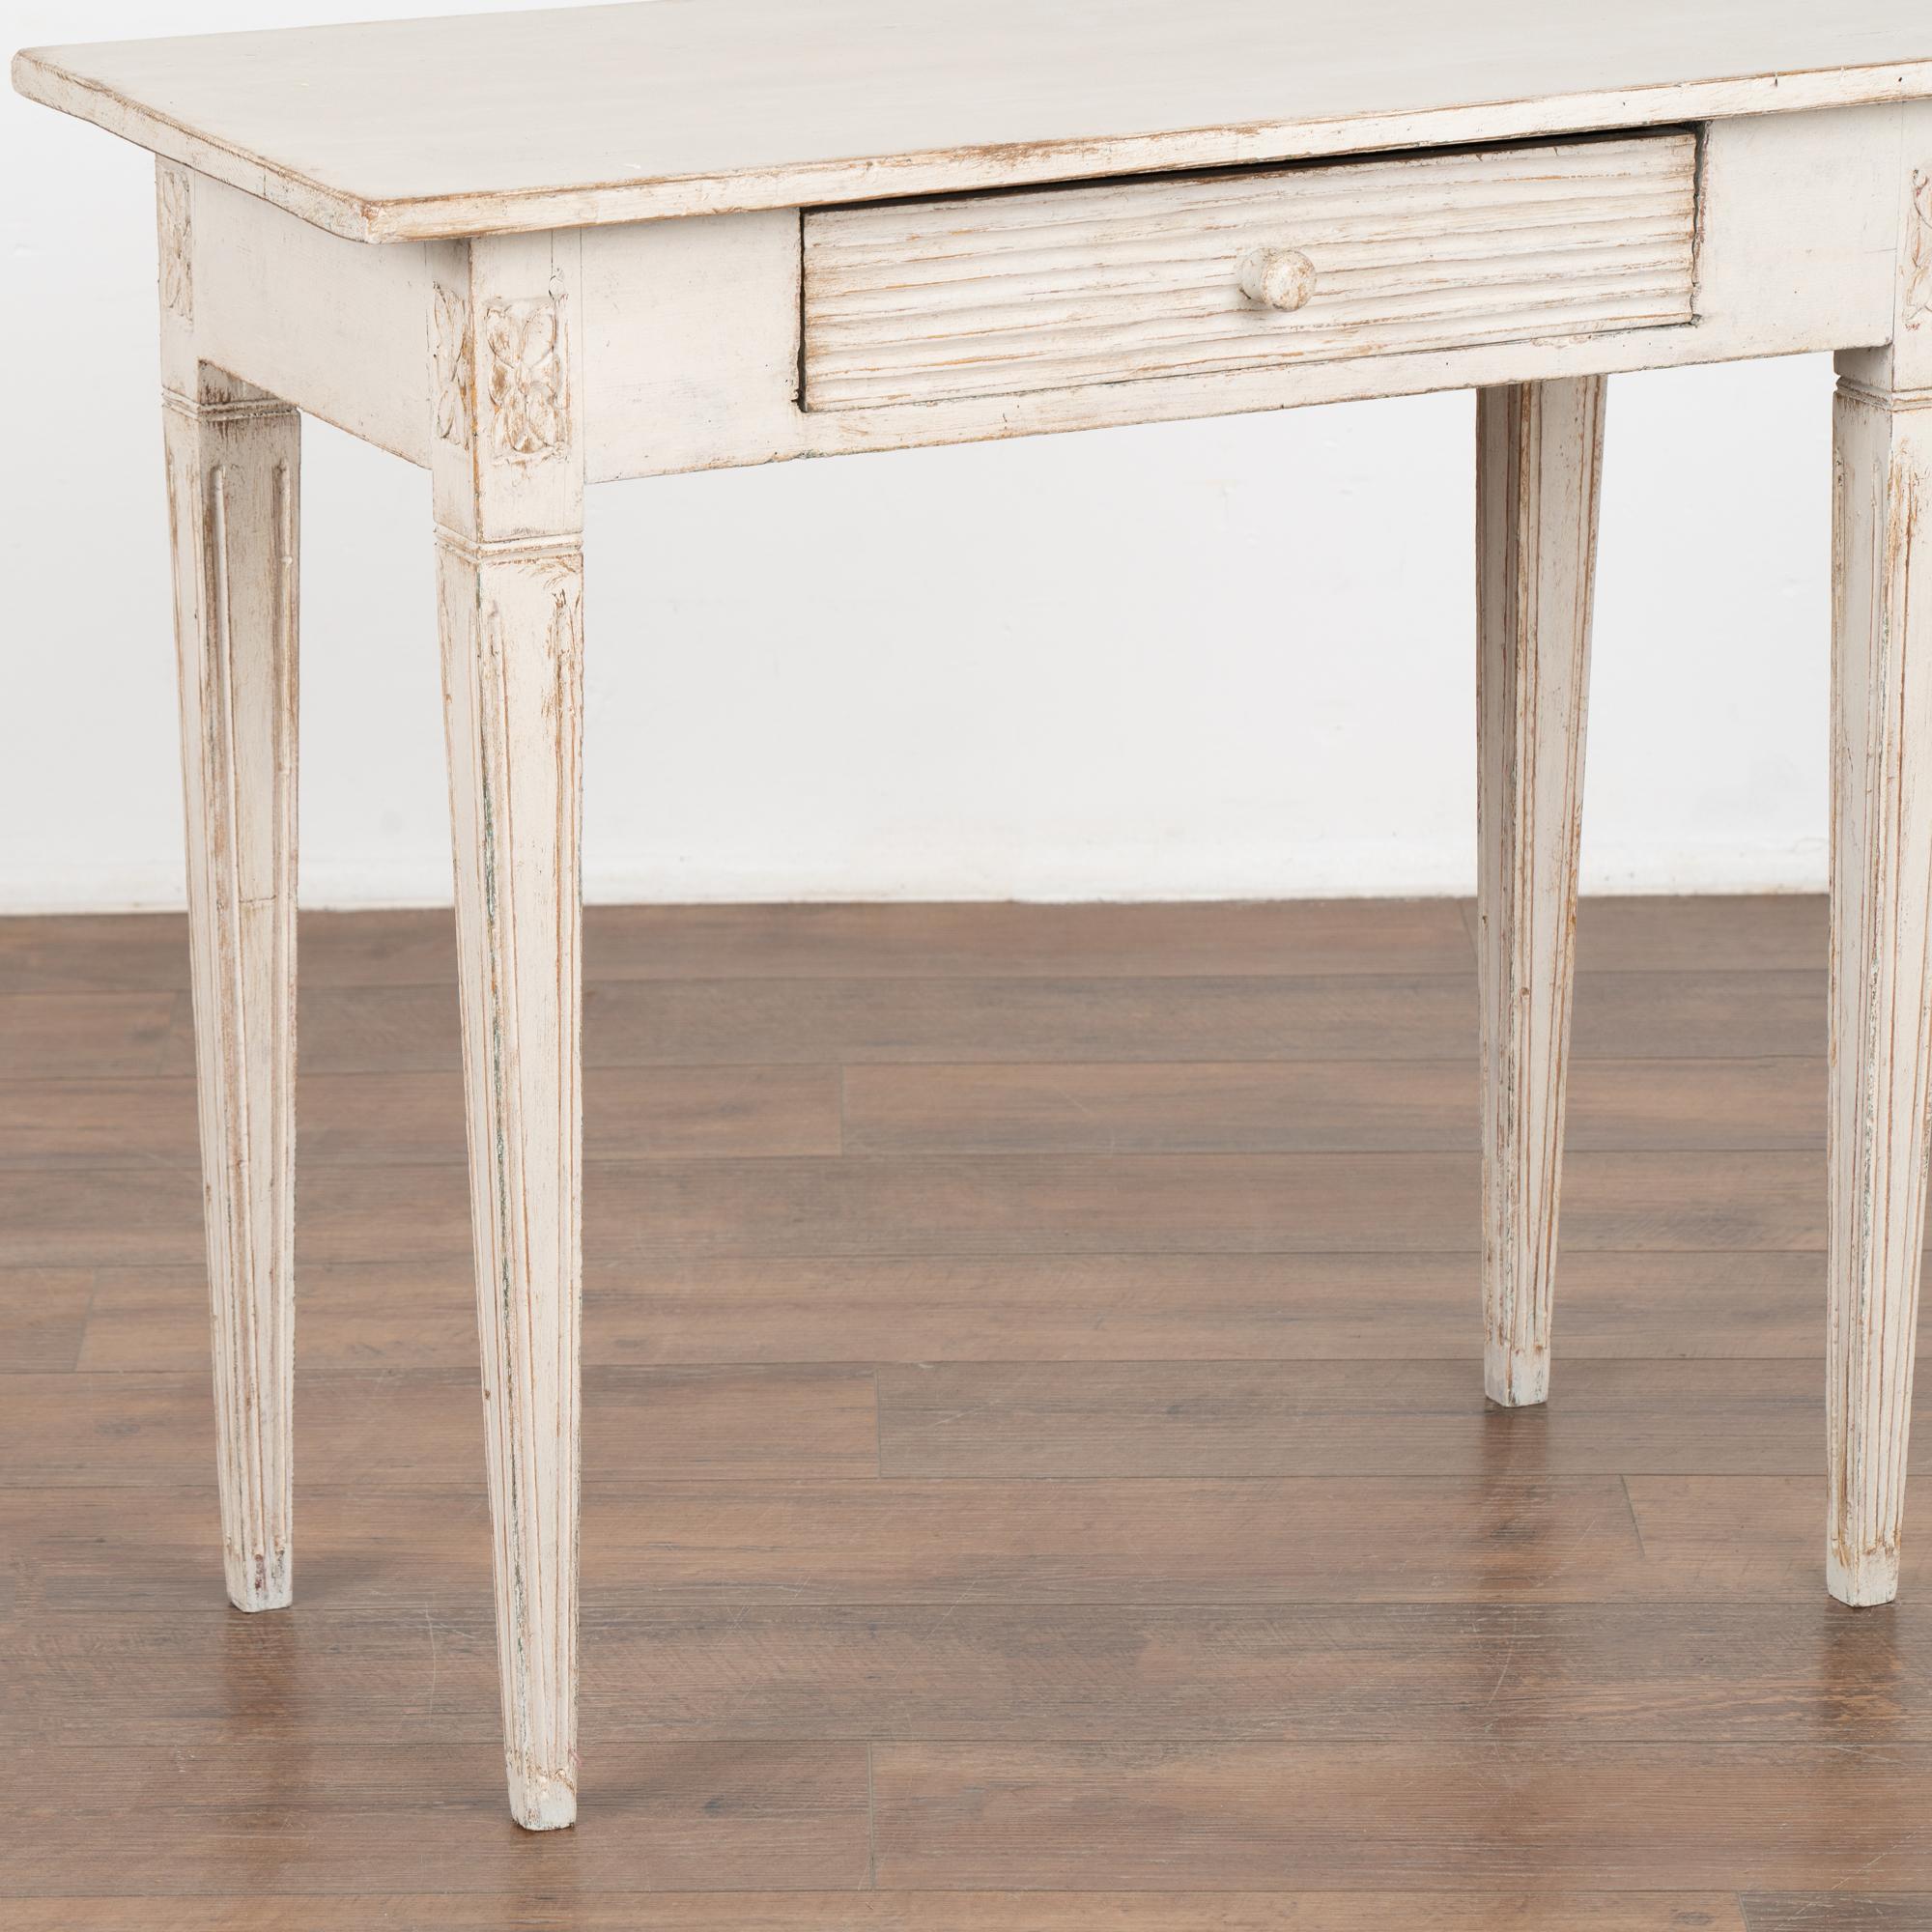 Wood White Painted Side Table With Single Drawer, Sweden circa 1860-80 For Sale